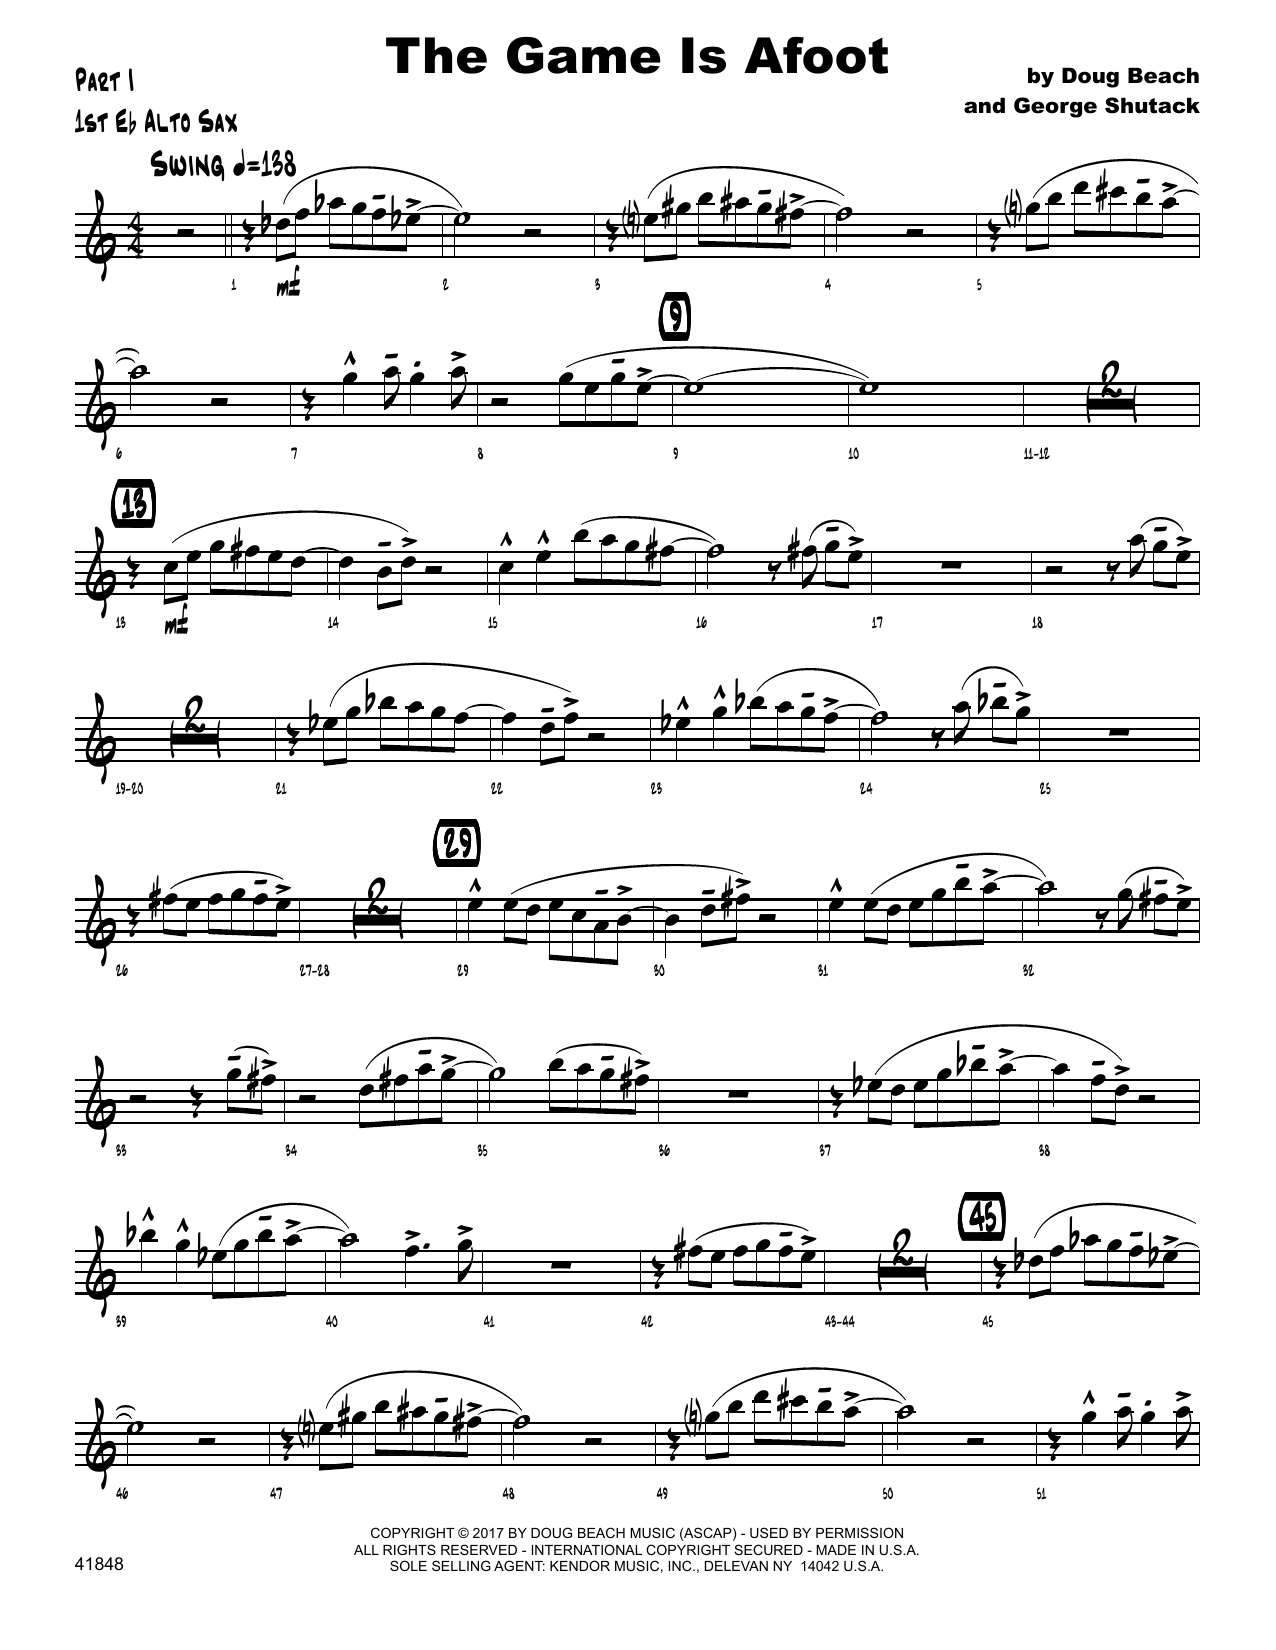 Download Doug Beach & George Shutack The Game Is Afoot - 1st Eb Alto Saxopho Sheet Music